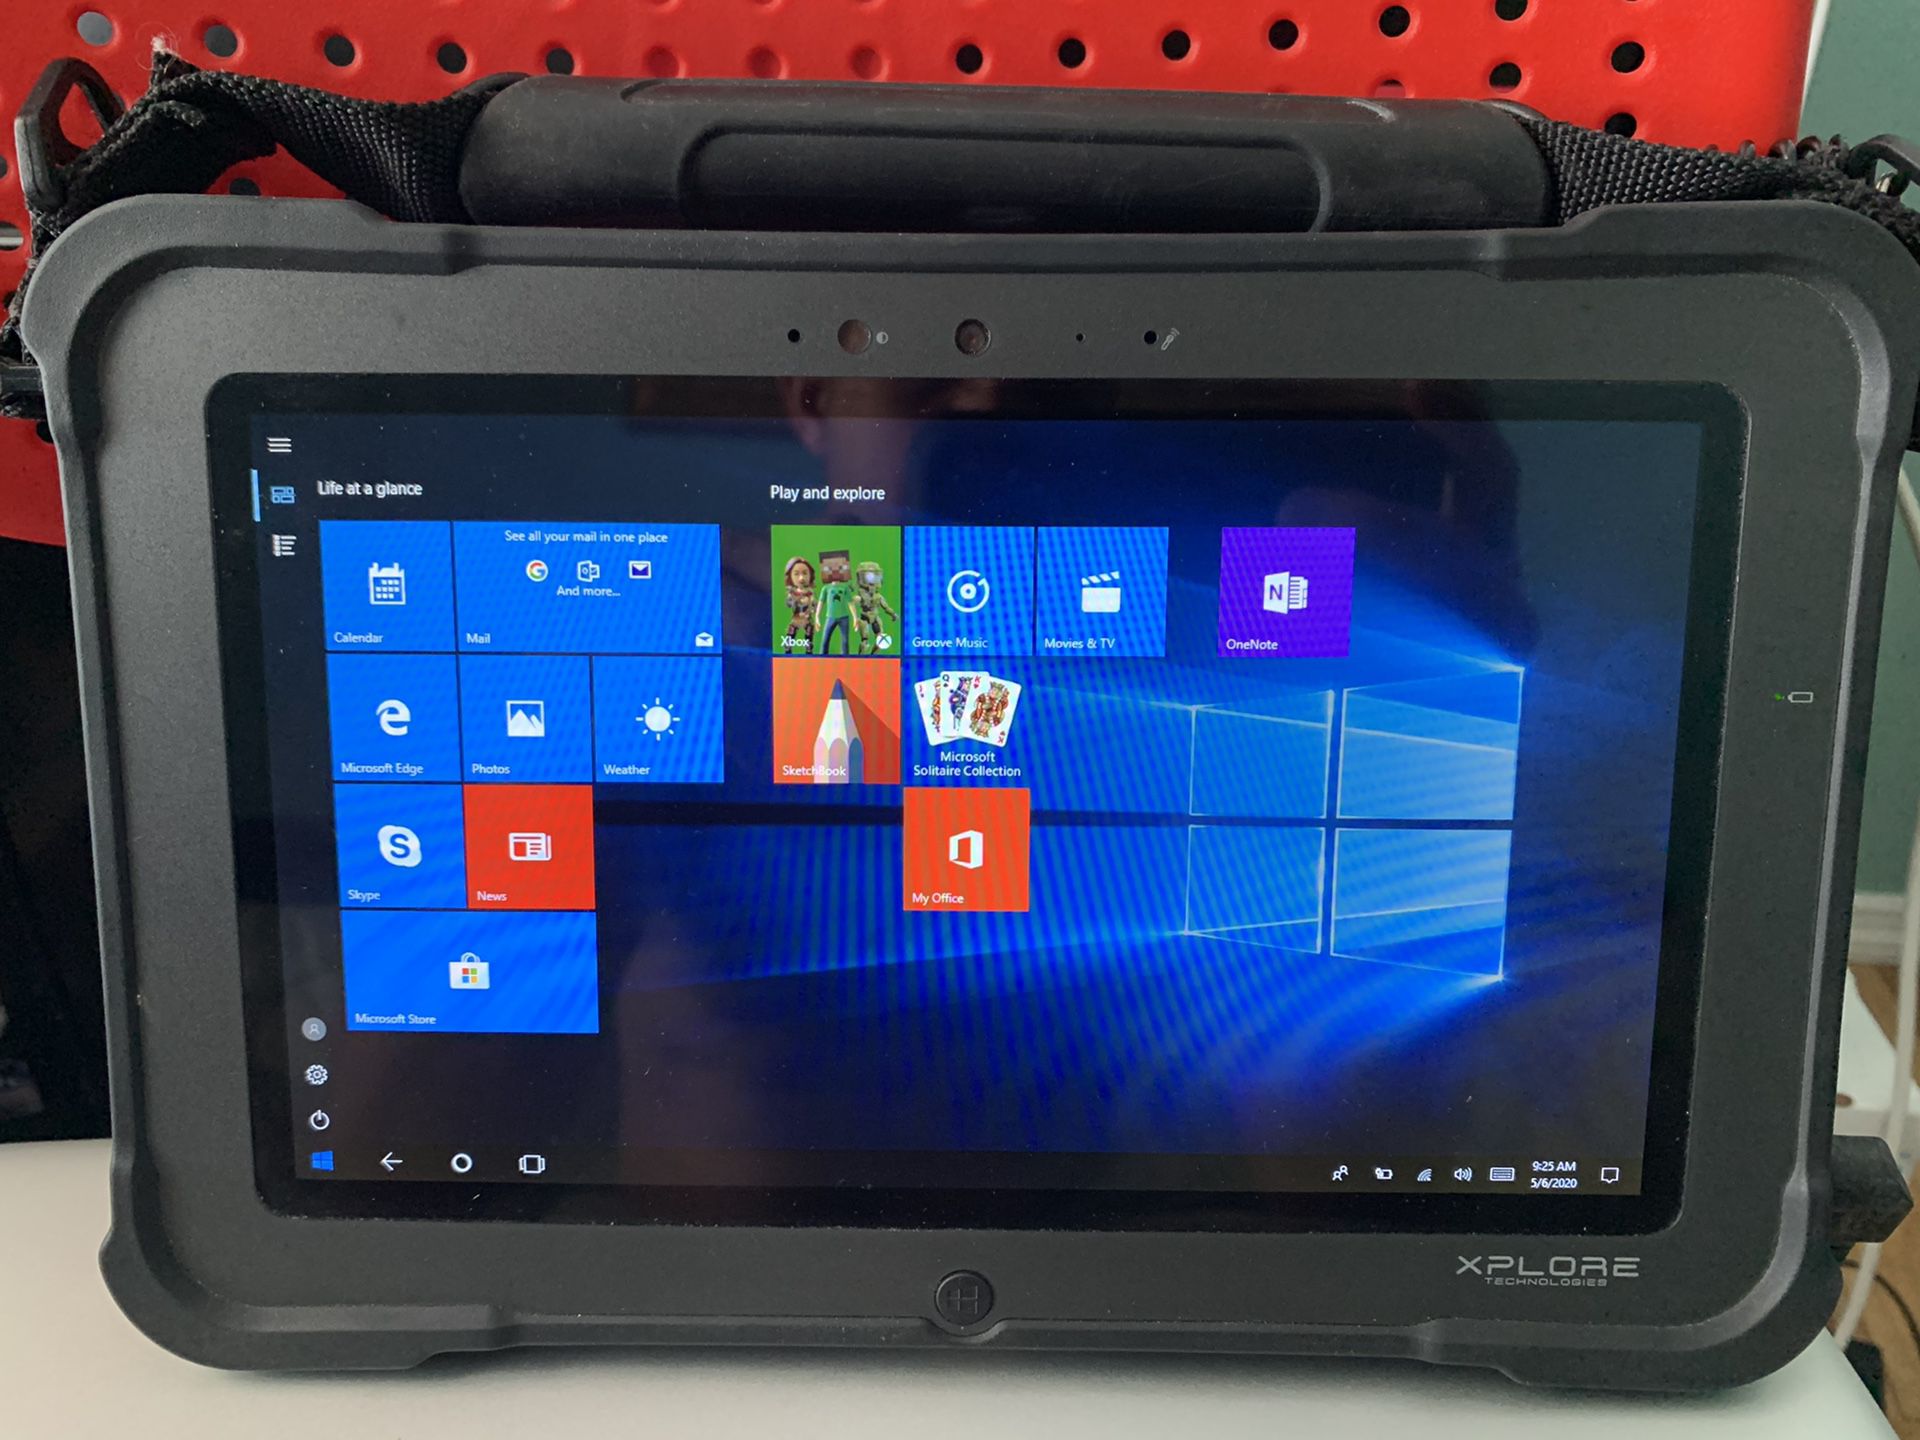 Tablet laptop xplore technologies windows 10 is come whit charger is working good